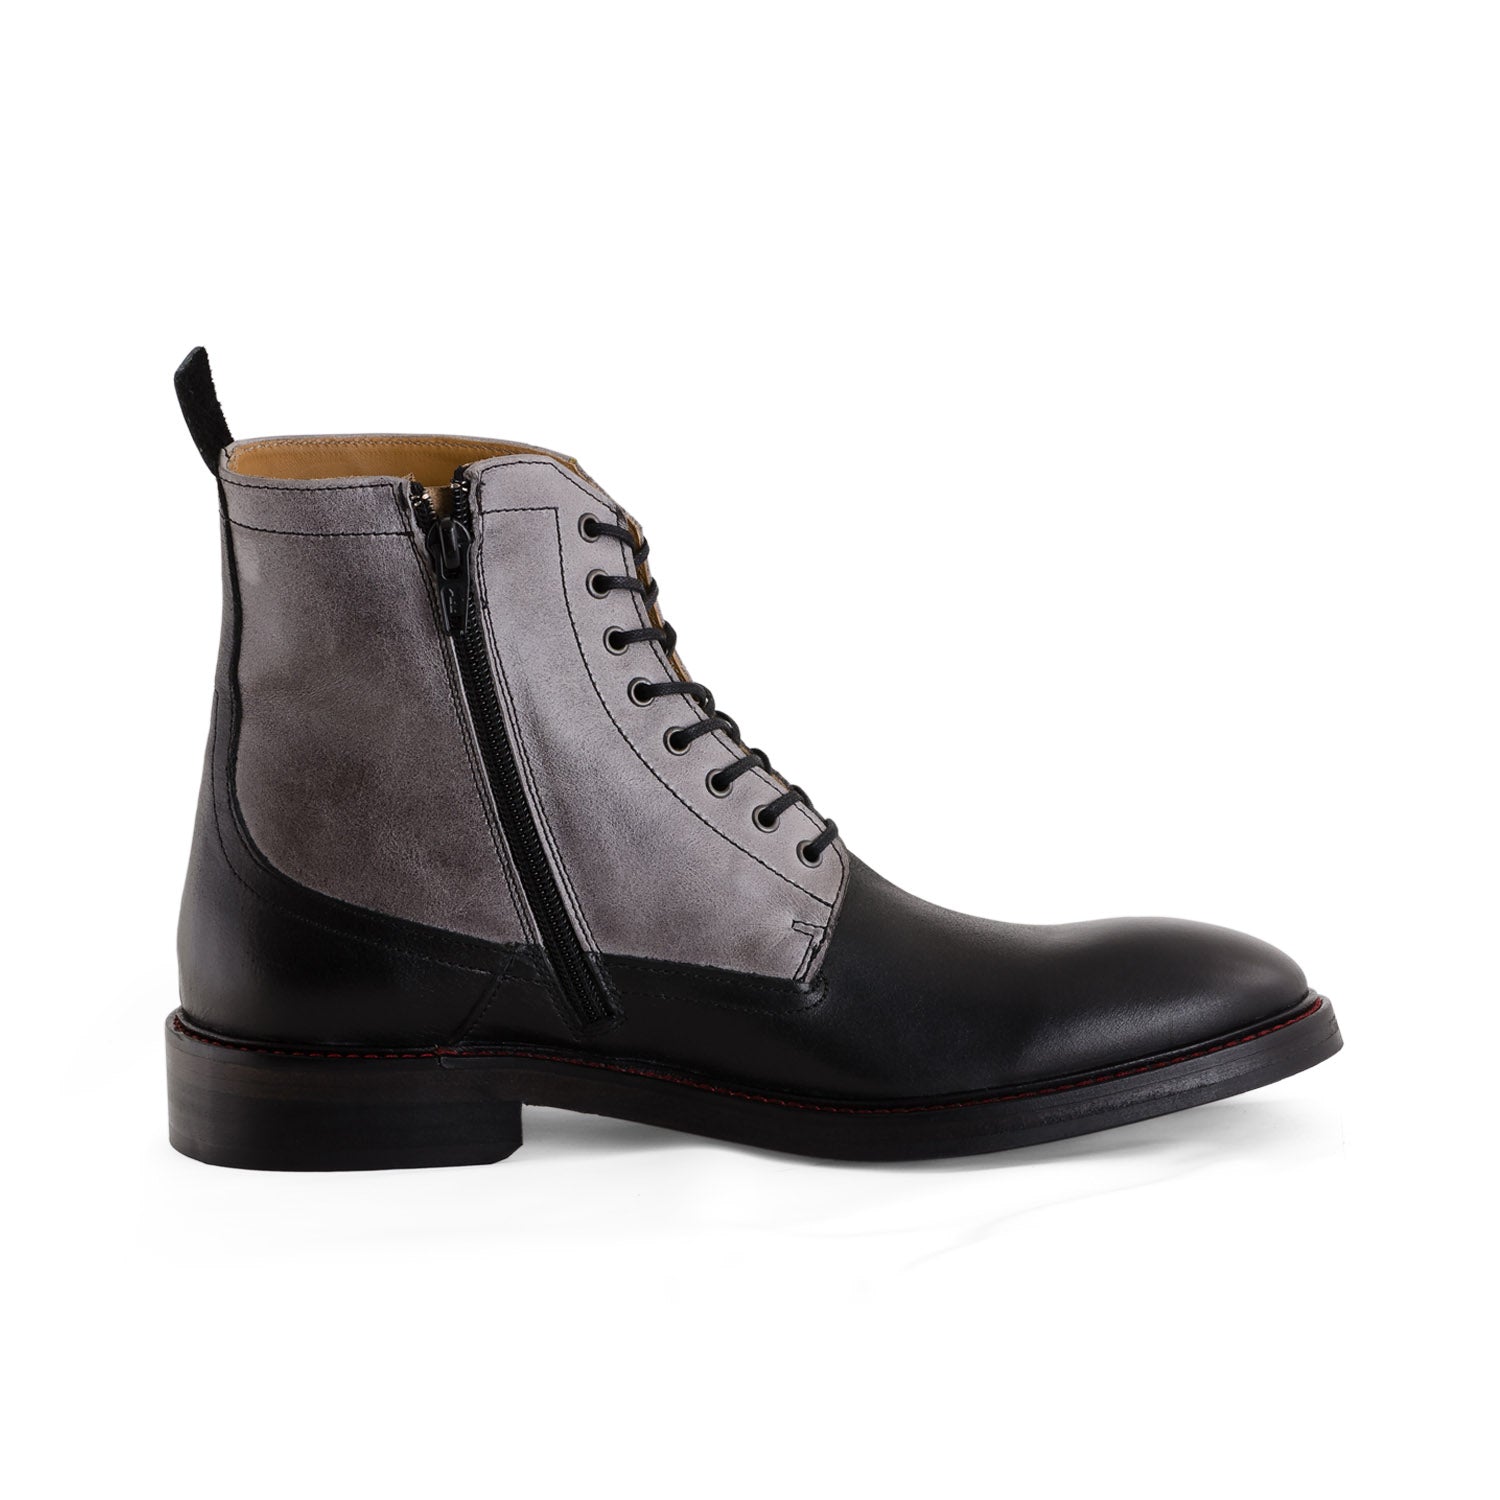 The Limited-Edition Dress Boot (3 color options) - NiK Kacy